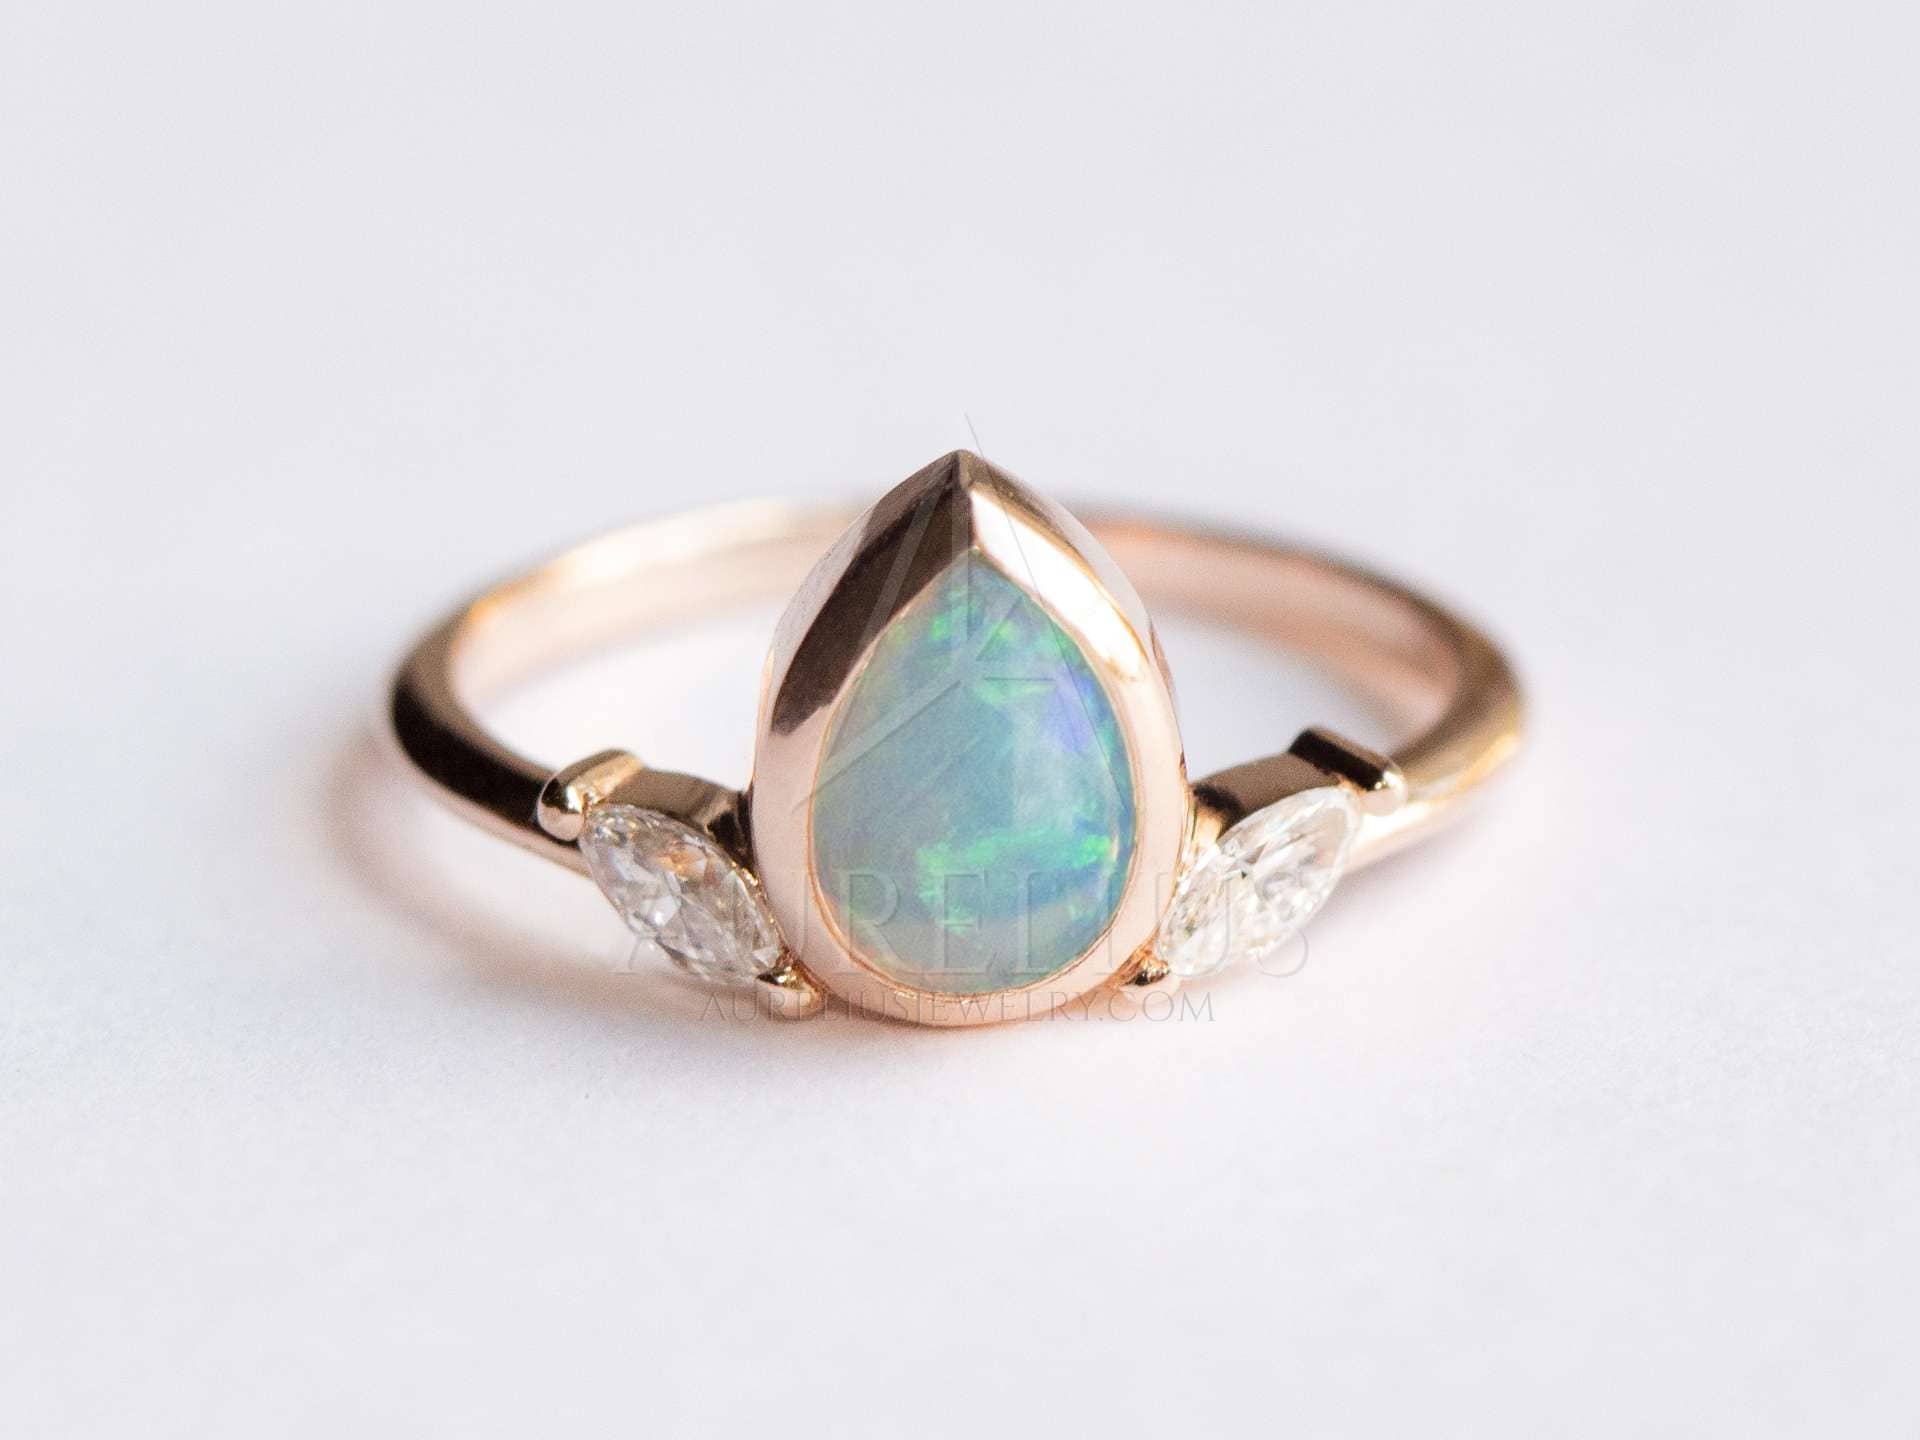 Opal Ring Round Opal White Stone Hand Jewelry Fashion Jewelry Ring Size 10  Rings for Women Set 